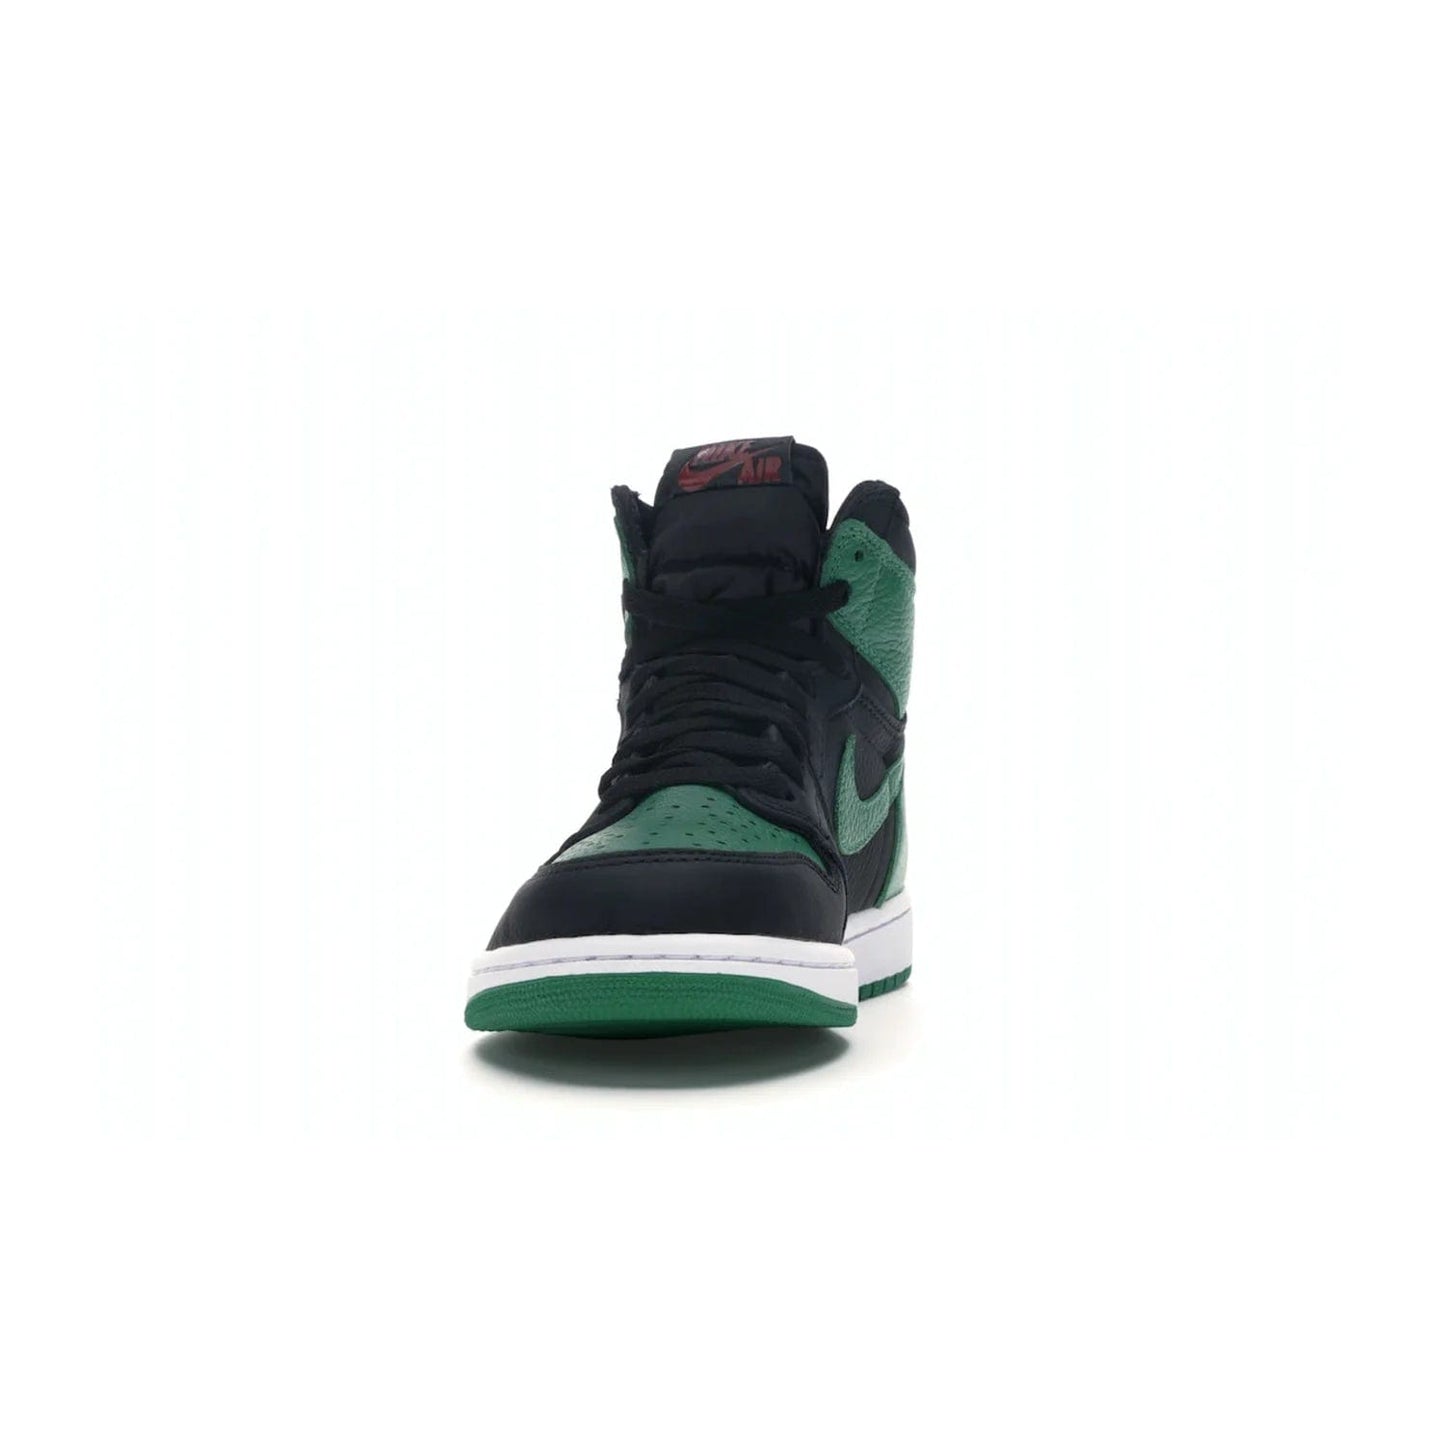 Jordan 1 Retro High Pine Green Black - Image 11 - Only at www.BallersClubKickz.com - Step into fresh style with the Jordan 1 Retro High Pine Green Black. Combining a black tumbled leather upper with green leather overlays, this sneaker features a Gym Red embroidered tongue tag, sail midsole, and pine green outsole for iconic style with a unique twist.